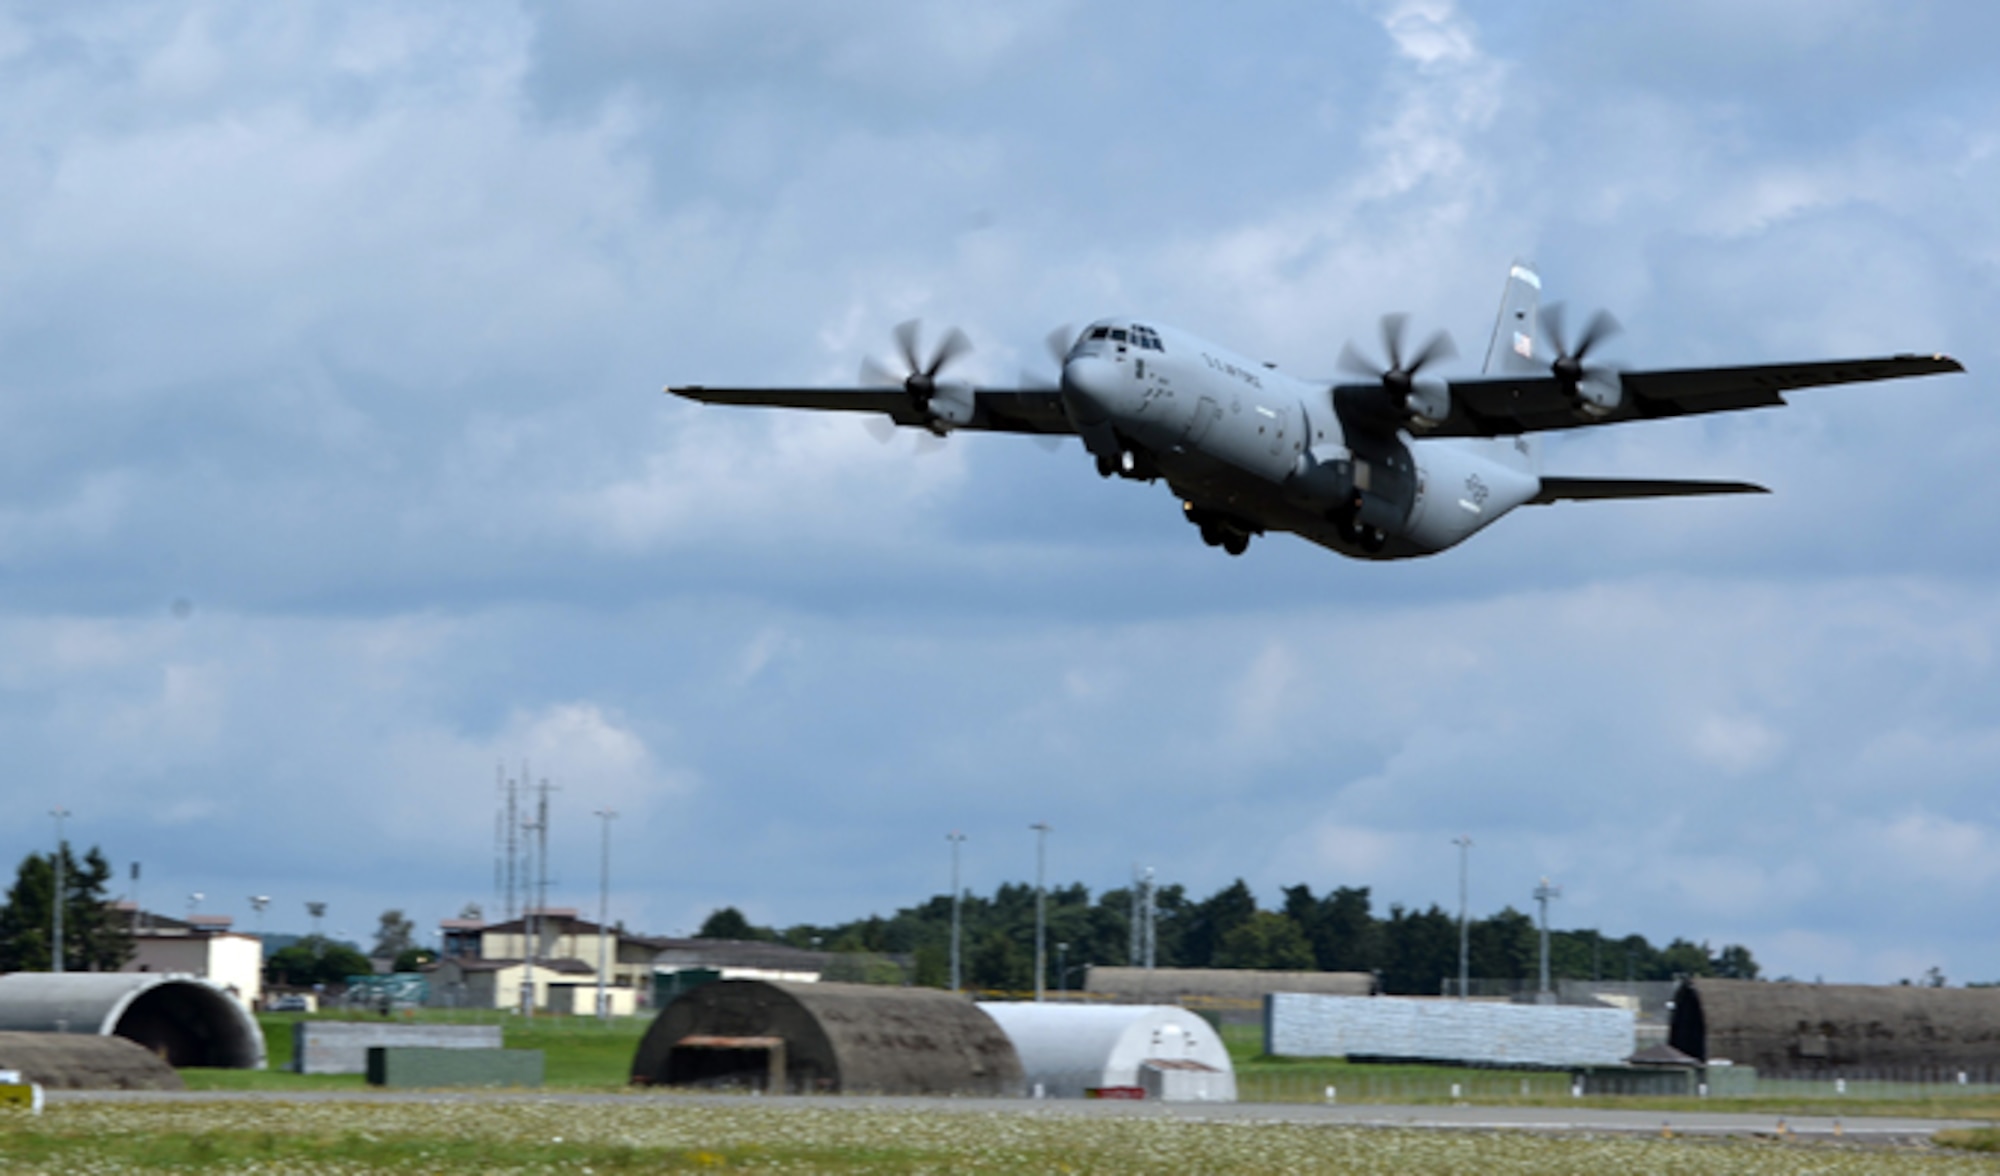 A C-130 Hercules takes off Aug. 9, 2014, from Spangdahlem Air Base, Germany, and is headed toward Souda Bay, Greece. Airmen from Spangdahlem AB will be supporting a bilateral training event with the Hellenic air force Aug. 11-23. (U.S. Air Force photo/Staff Sgt. Daryl Knee)